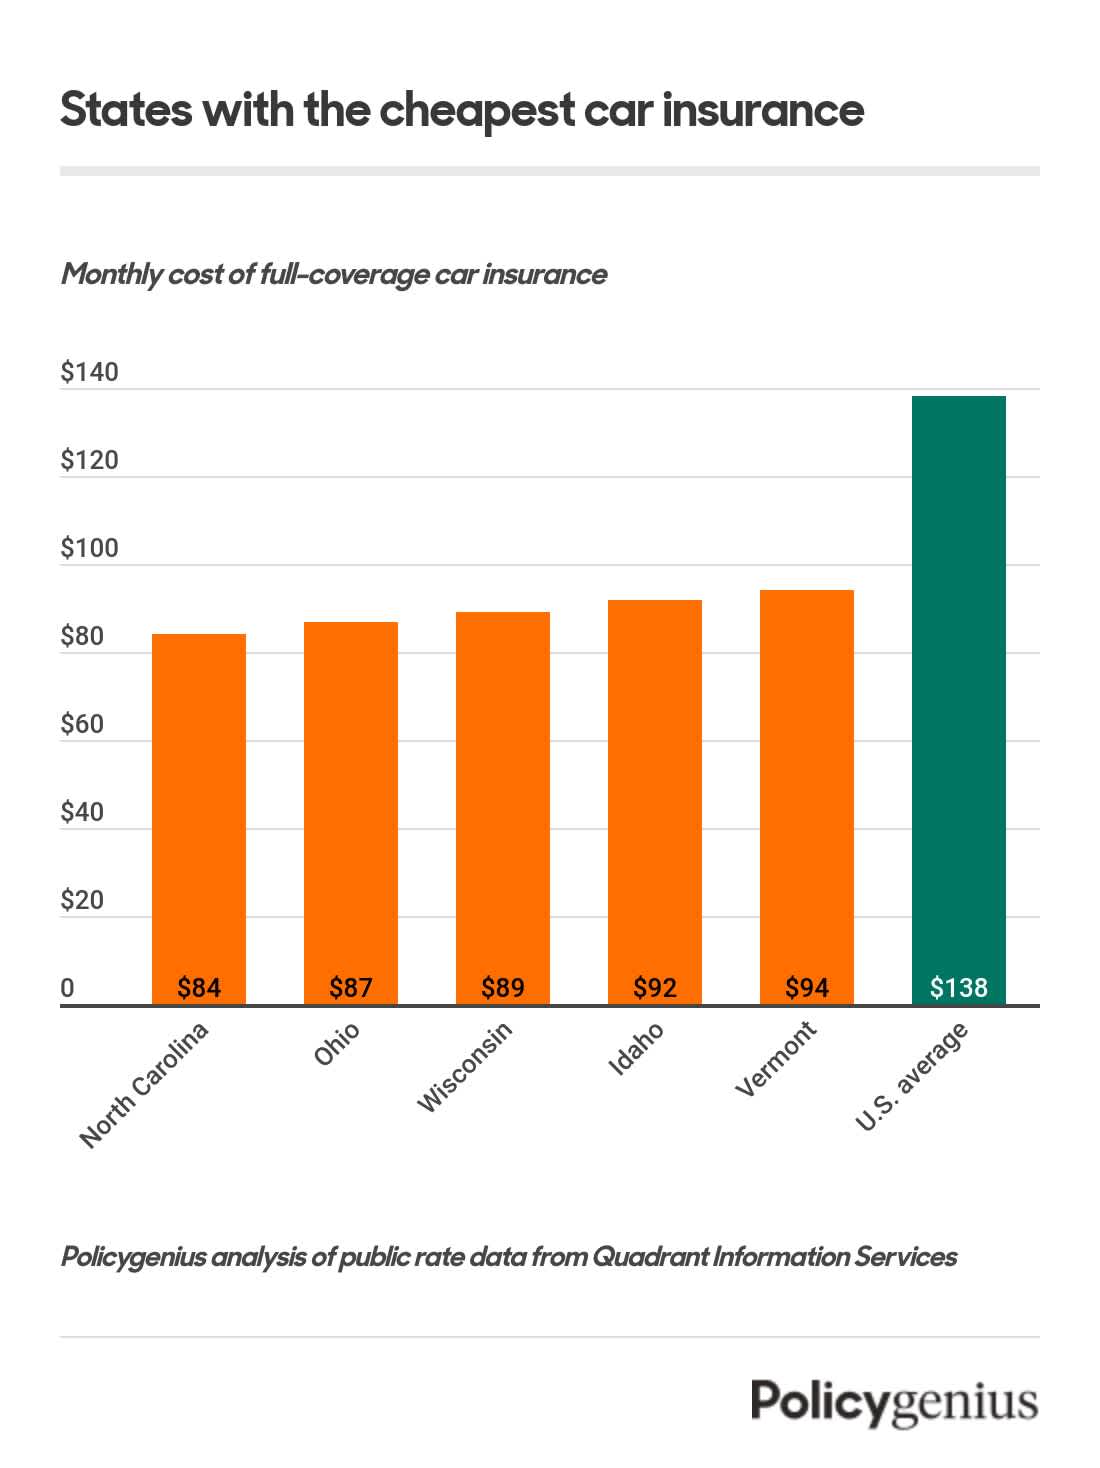 A bar graph showing the states that have the cheapest average costs of car insurance. Displayed are North Carolina, Ohio, Wisconsin, Idaho, and Vermont.